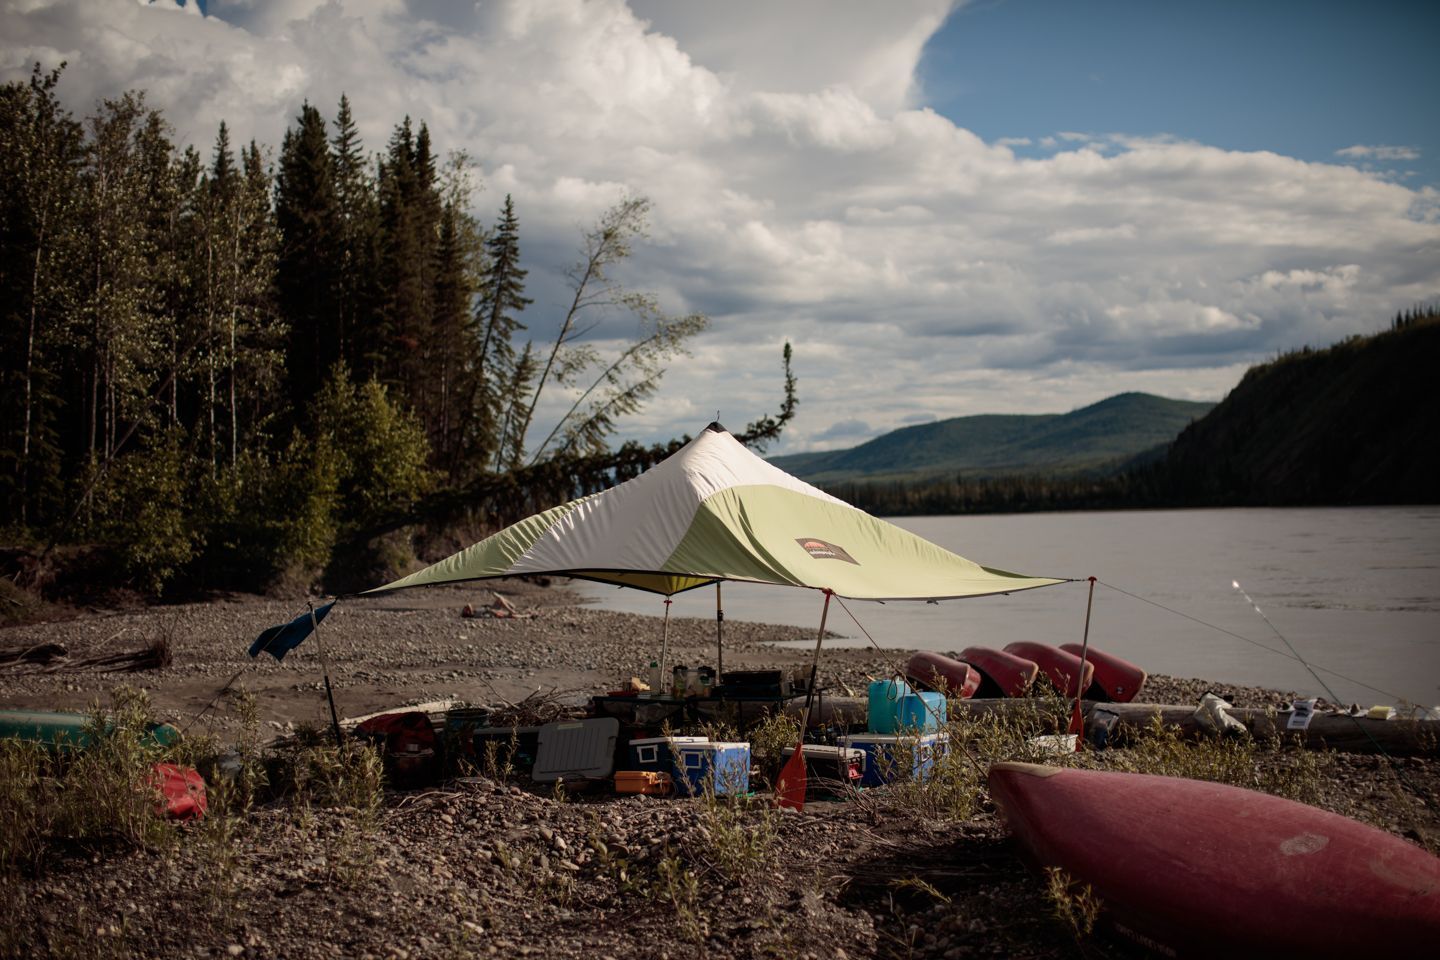 A campsite on the banks of the Yukon River, Canada